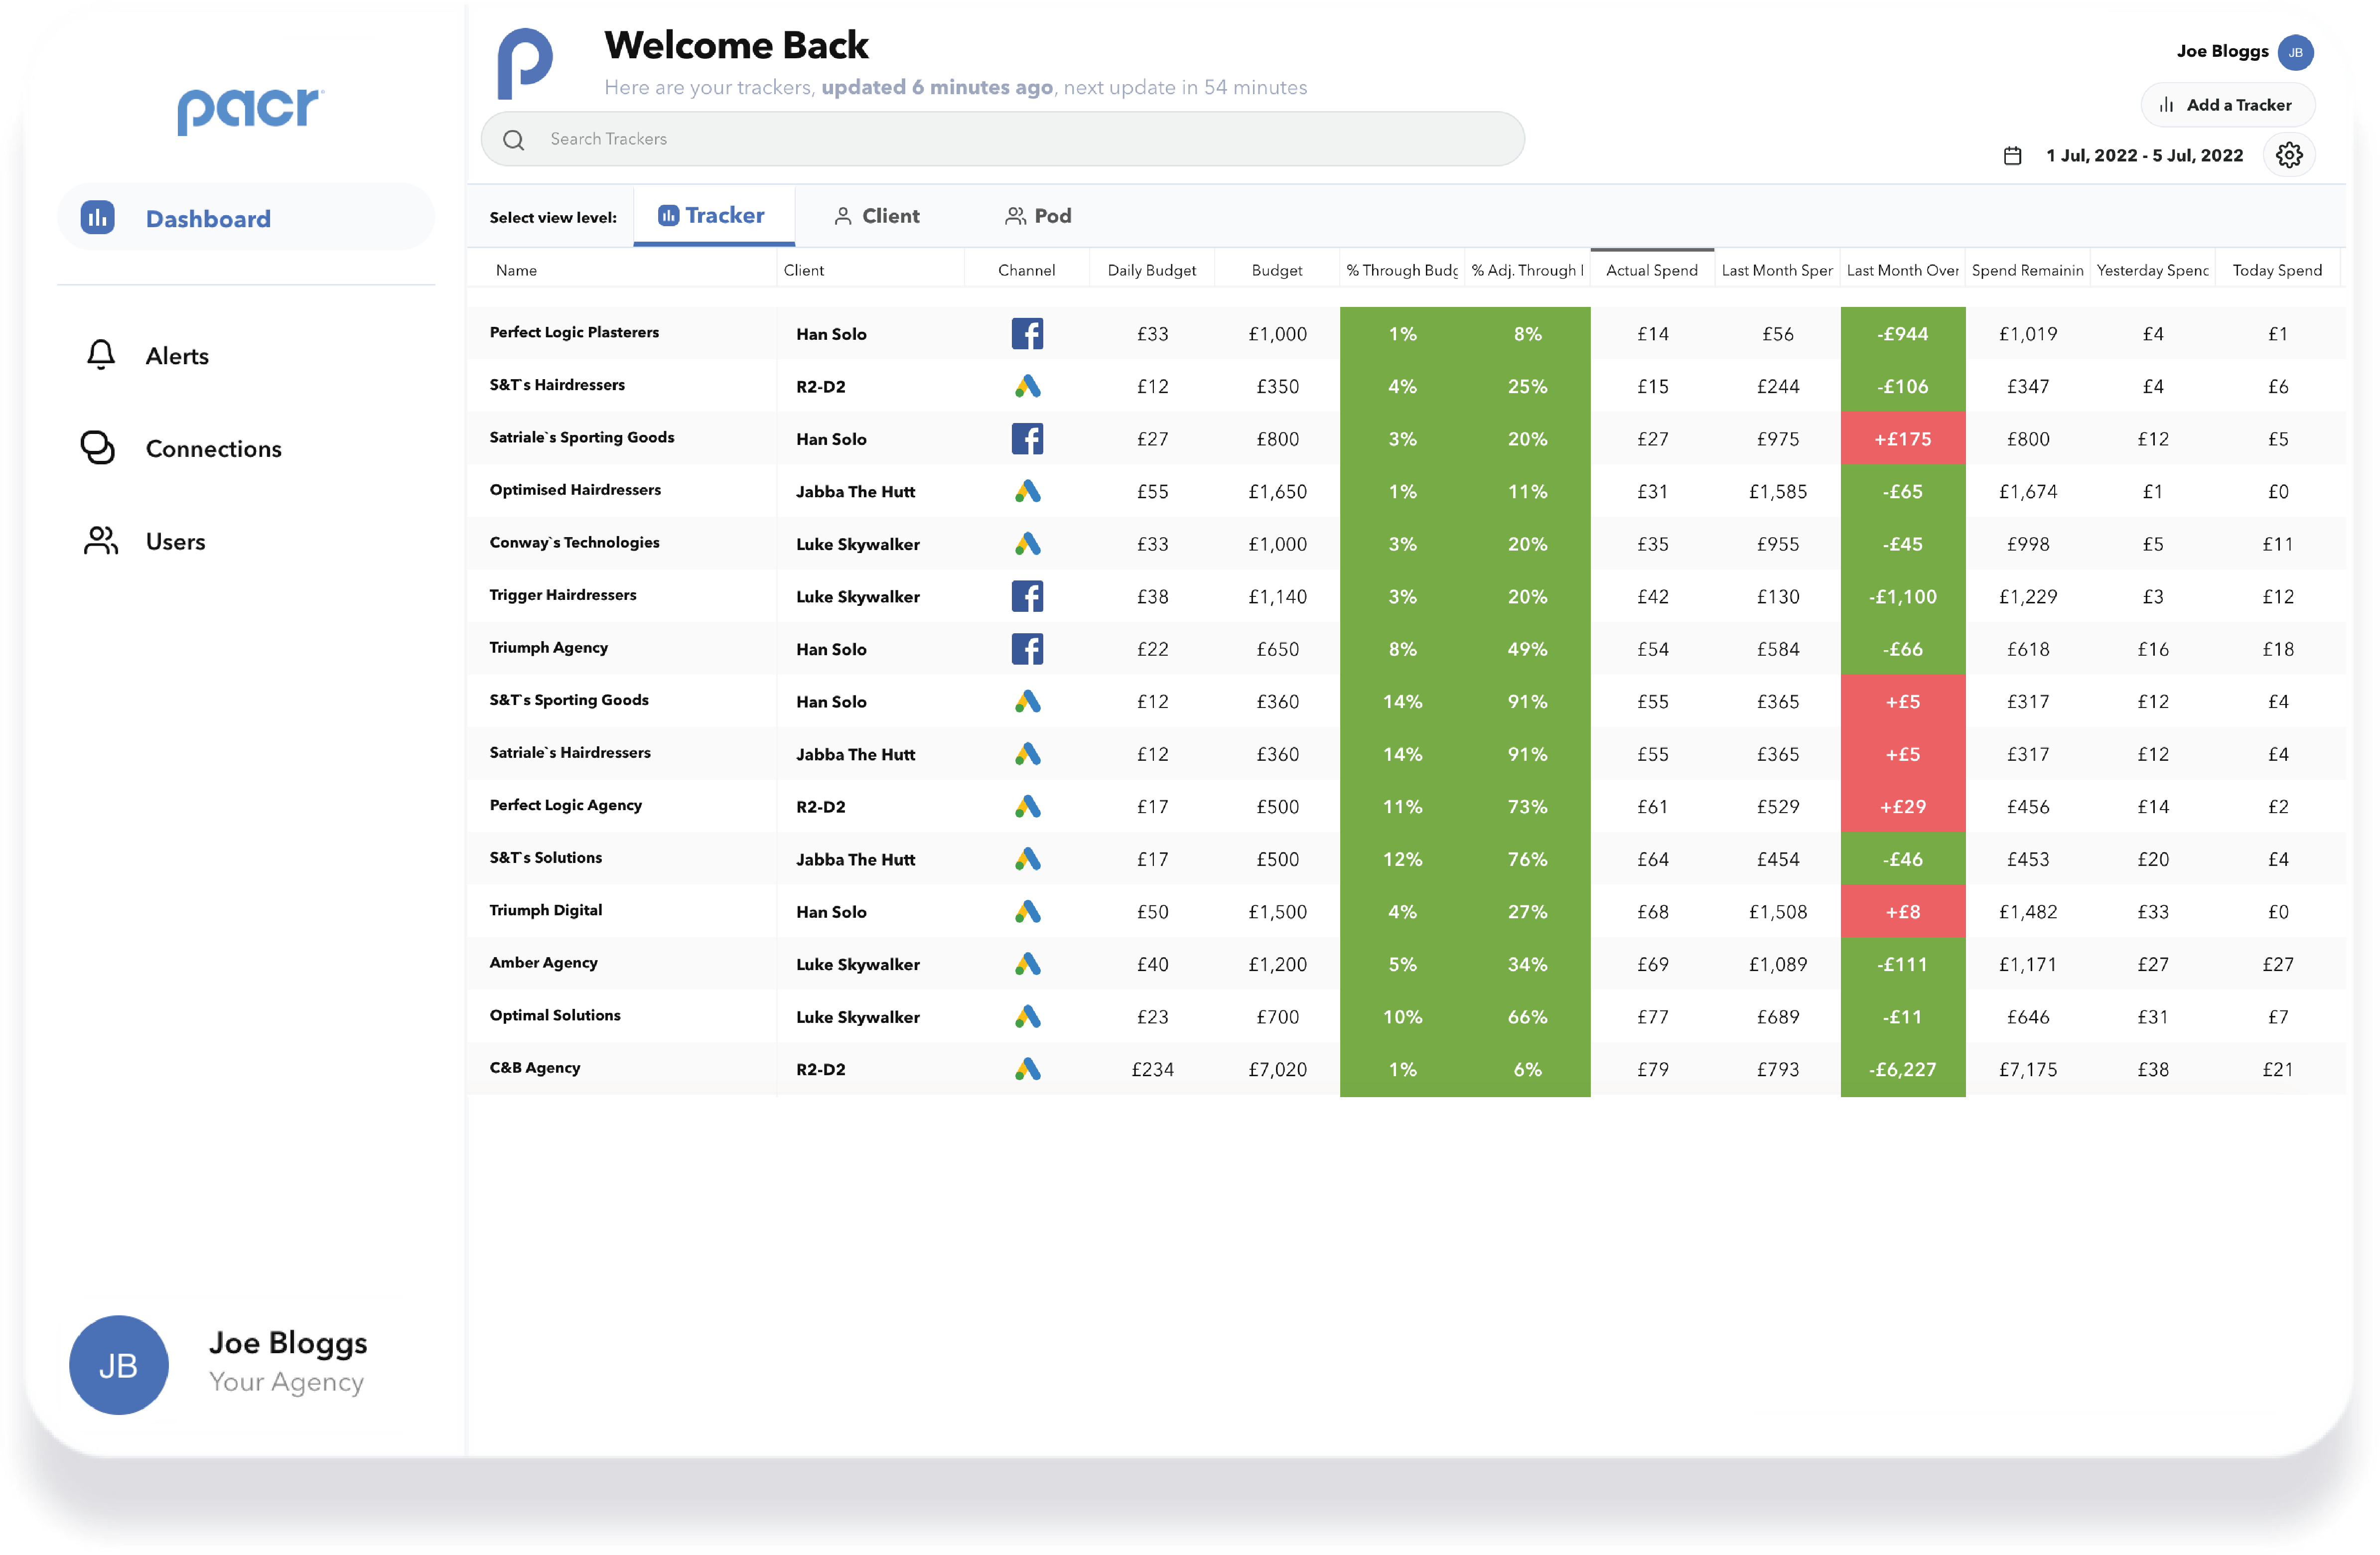 Paid Ad Spend Tracking dashboard